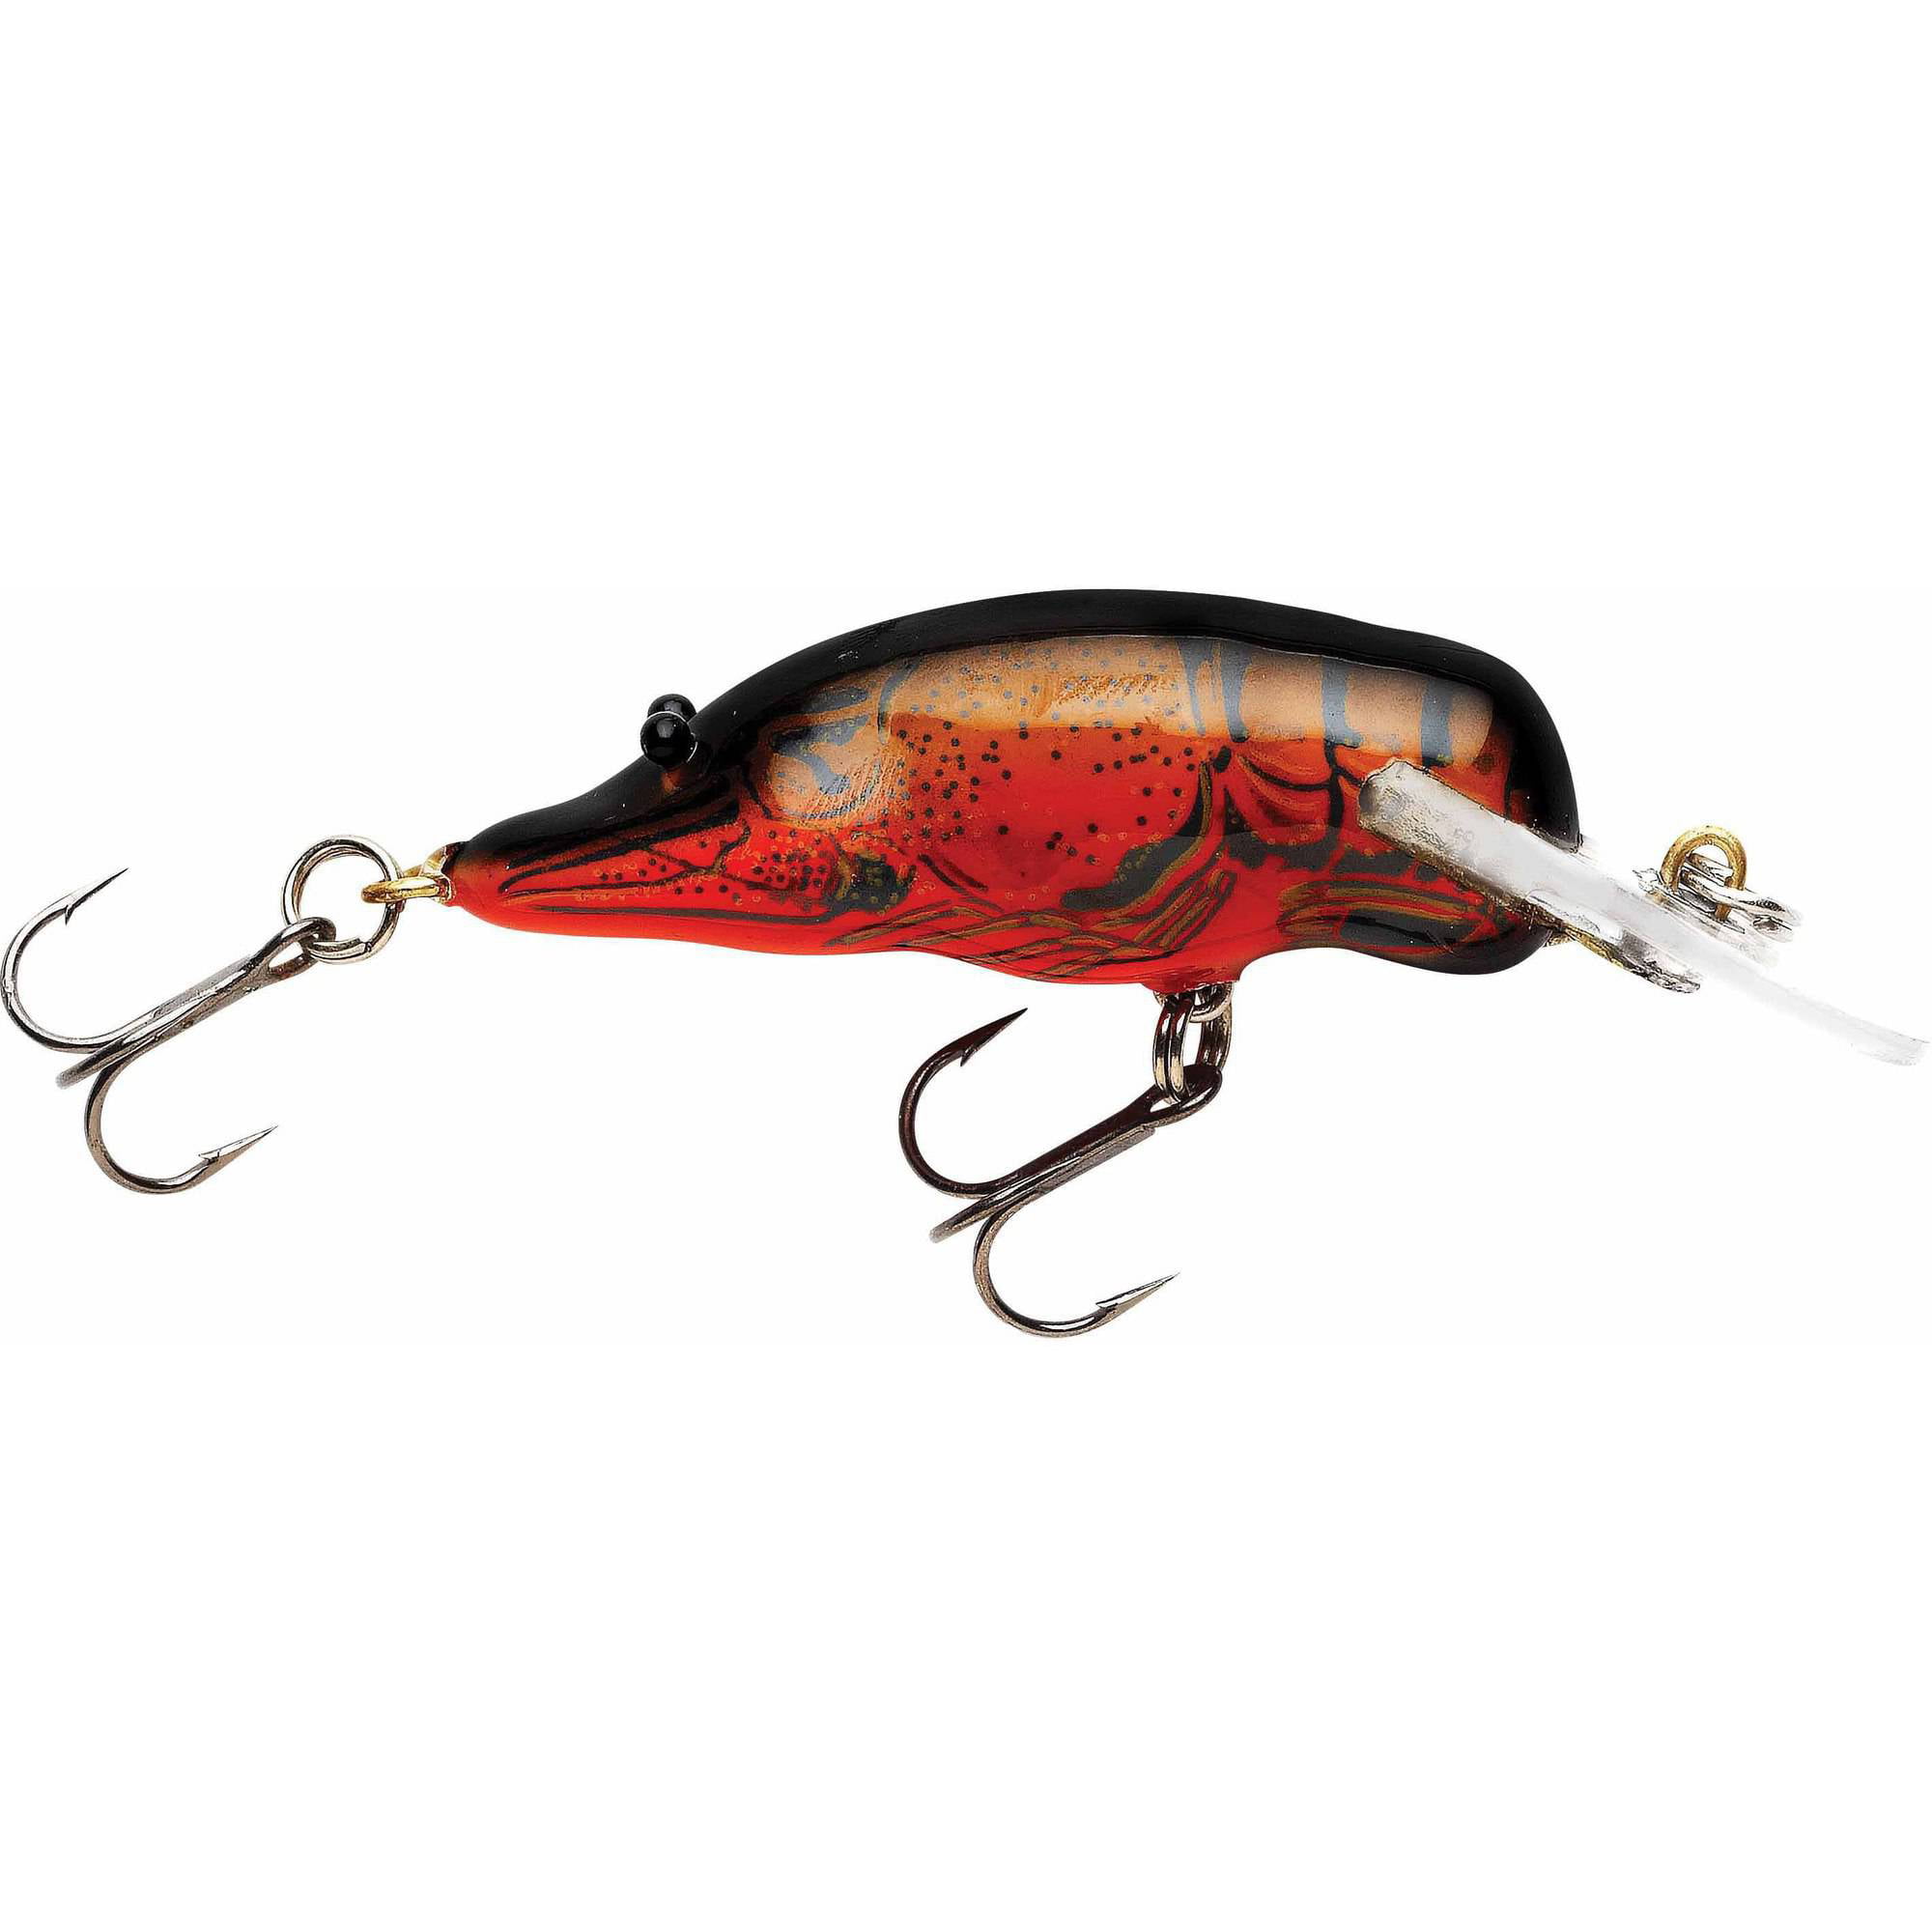 Bagley Small Fry Crayfish - Red Crayfish by Sportsman's Warehouse